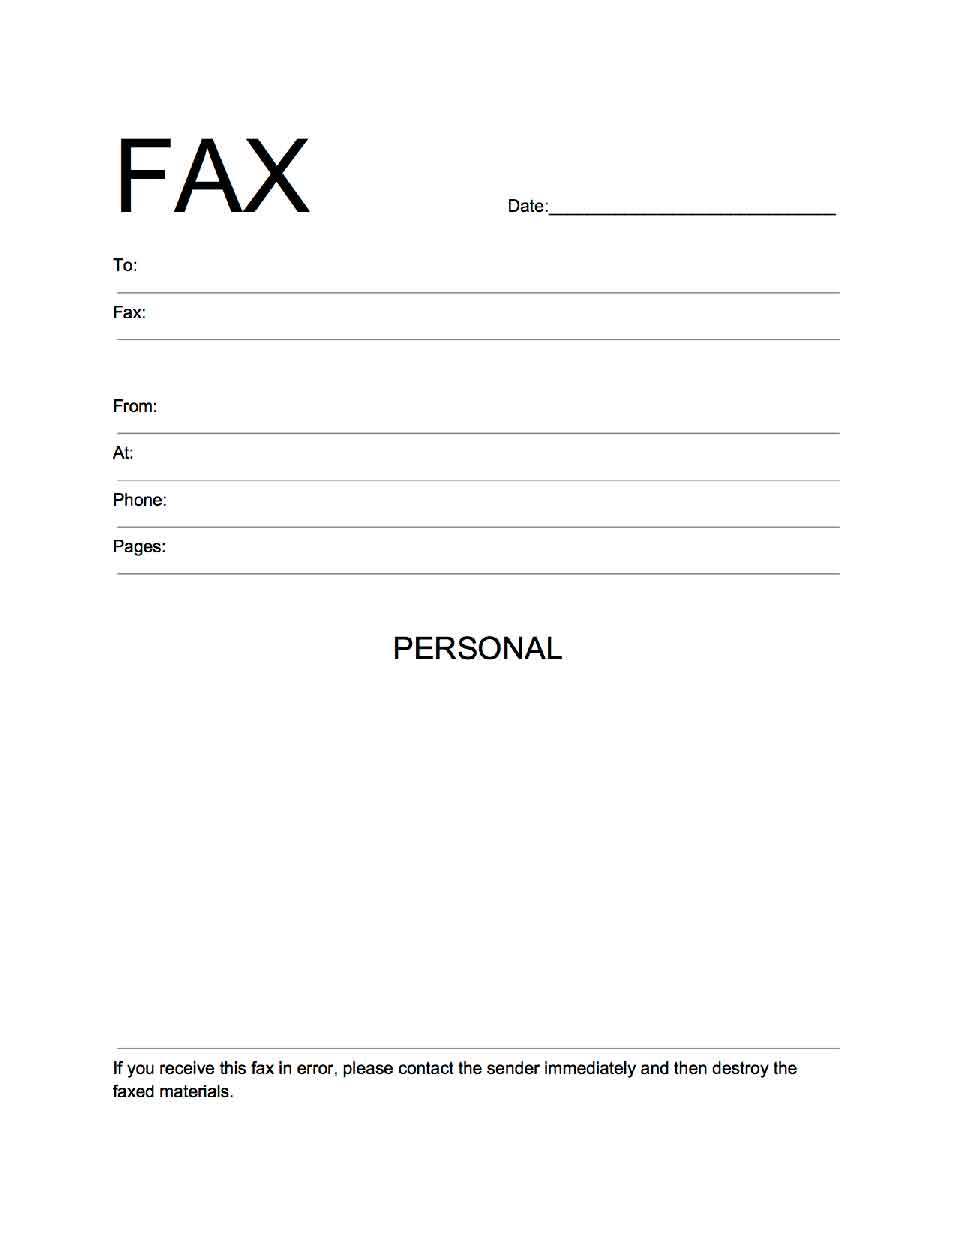 Fax Cover Sheet pdf ,Excel & Word | Free Fax Cover Sheet ...